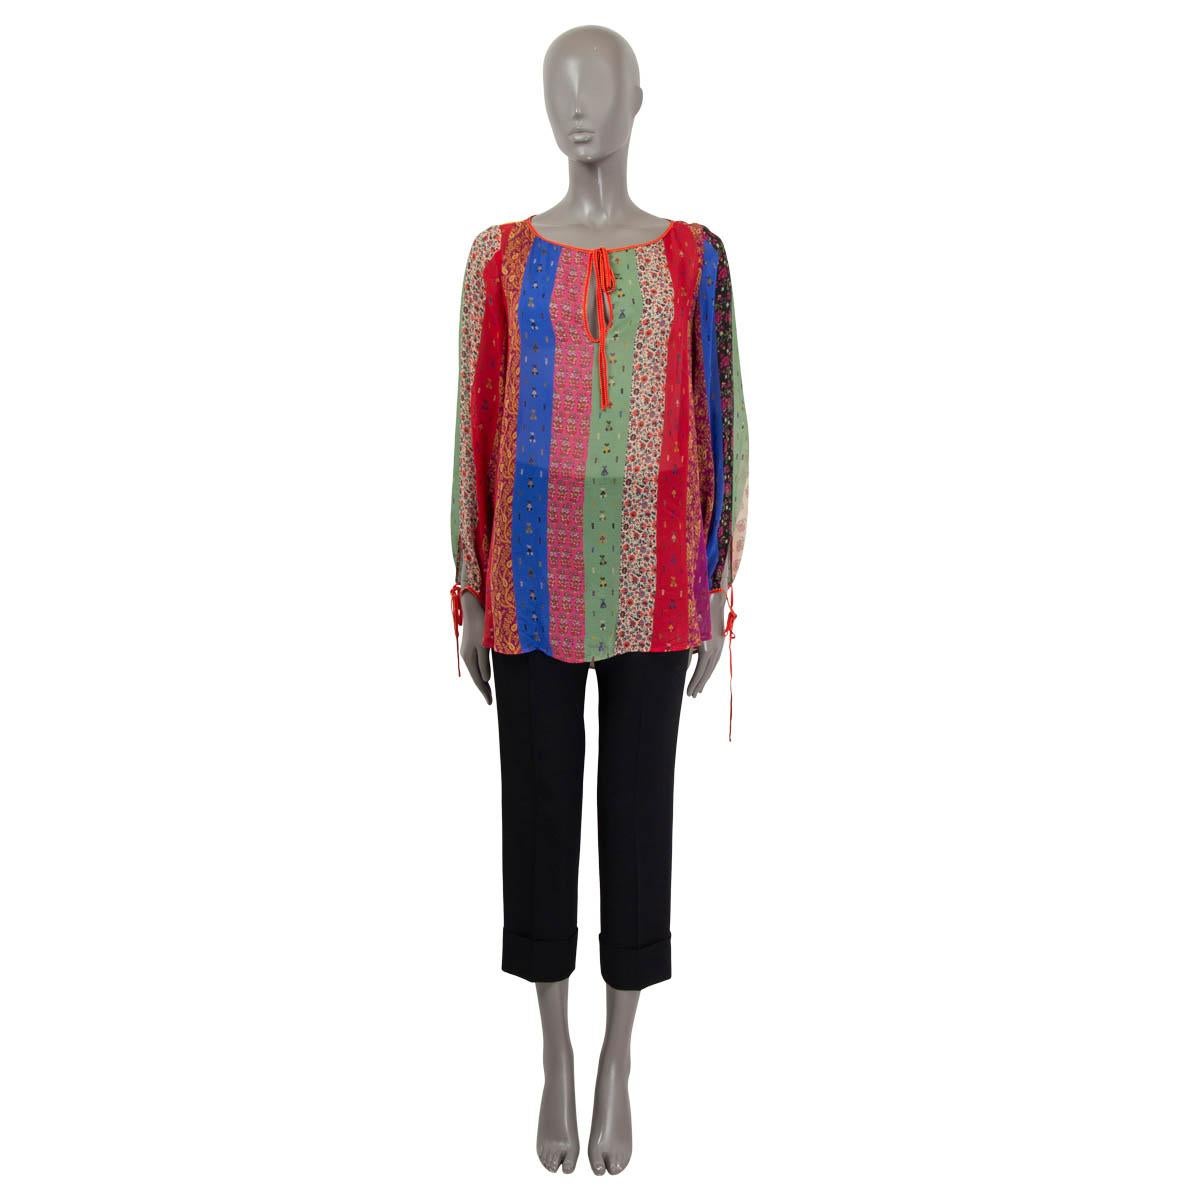 100% authentic Etro peasant blouse in silk (100%) pink, red, blue and purple with various multicolored paisley-printed patchwork stripes. Featuring keyholed-neck that ties with a cord around the neck and around wrists. Has been worn and is in